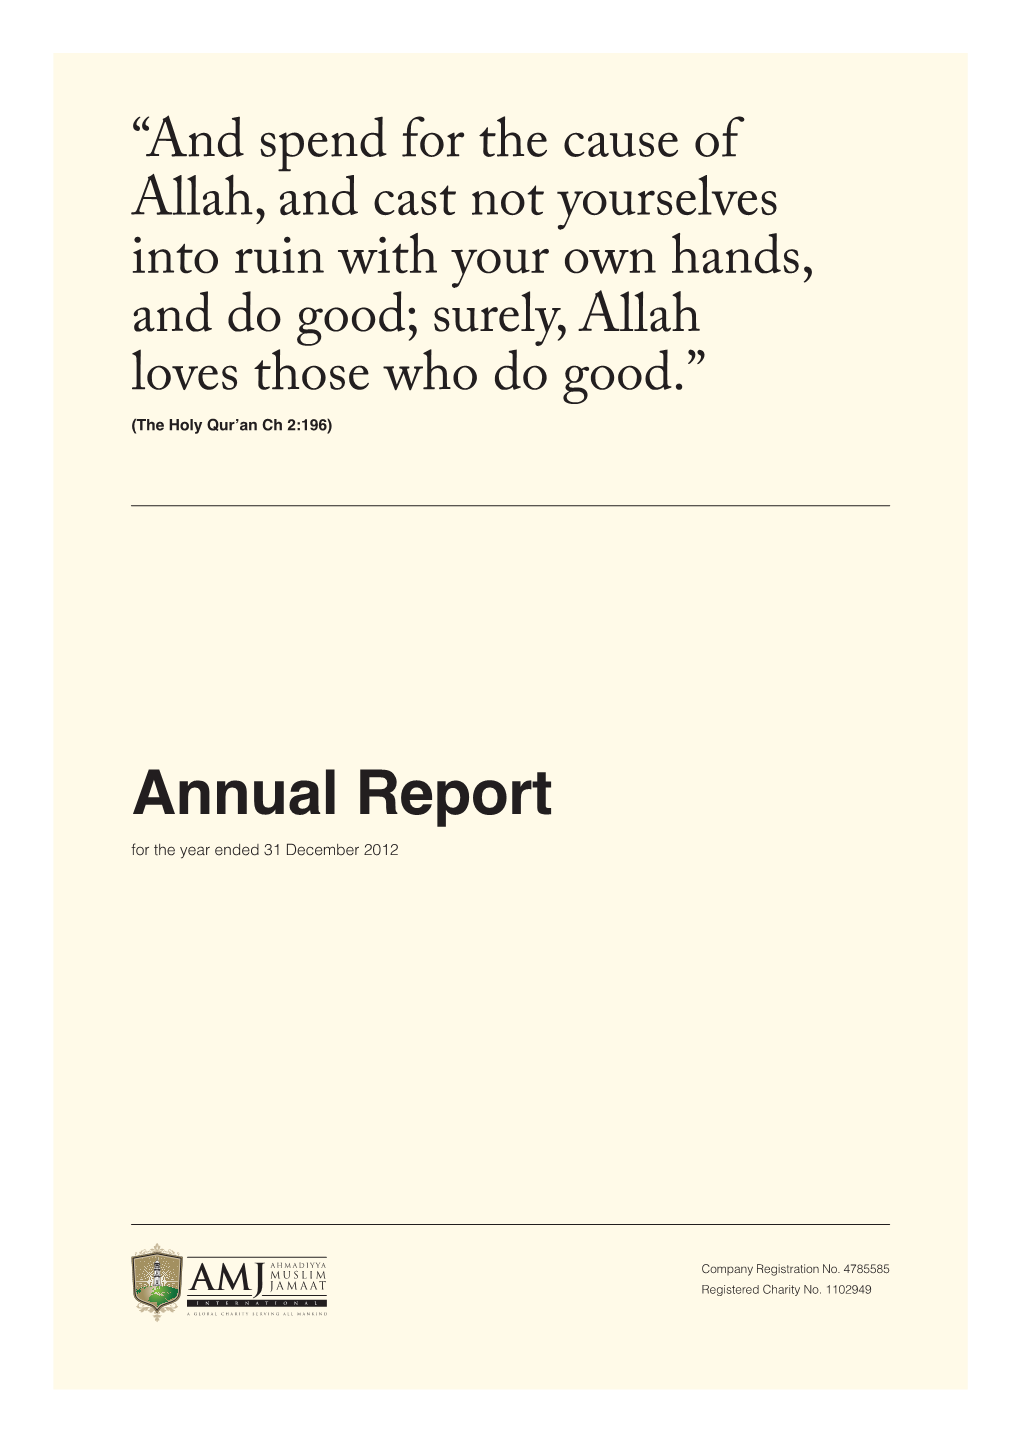 Annual Report for the Year Ended 31 December 2012